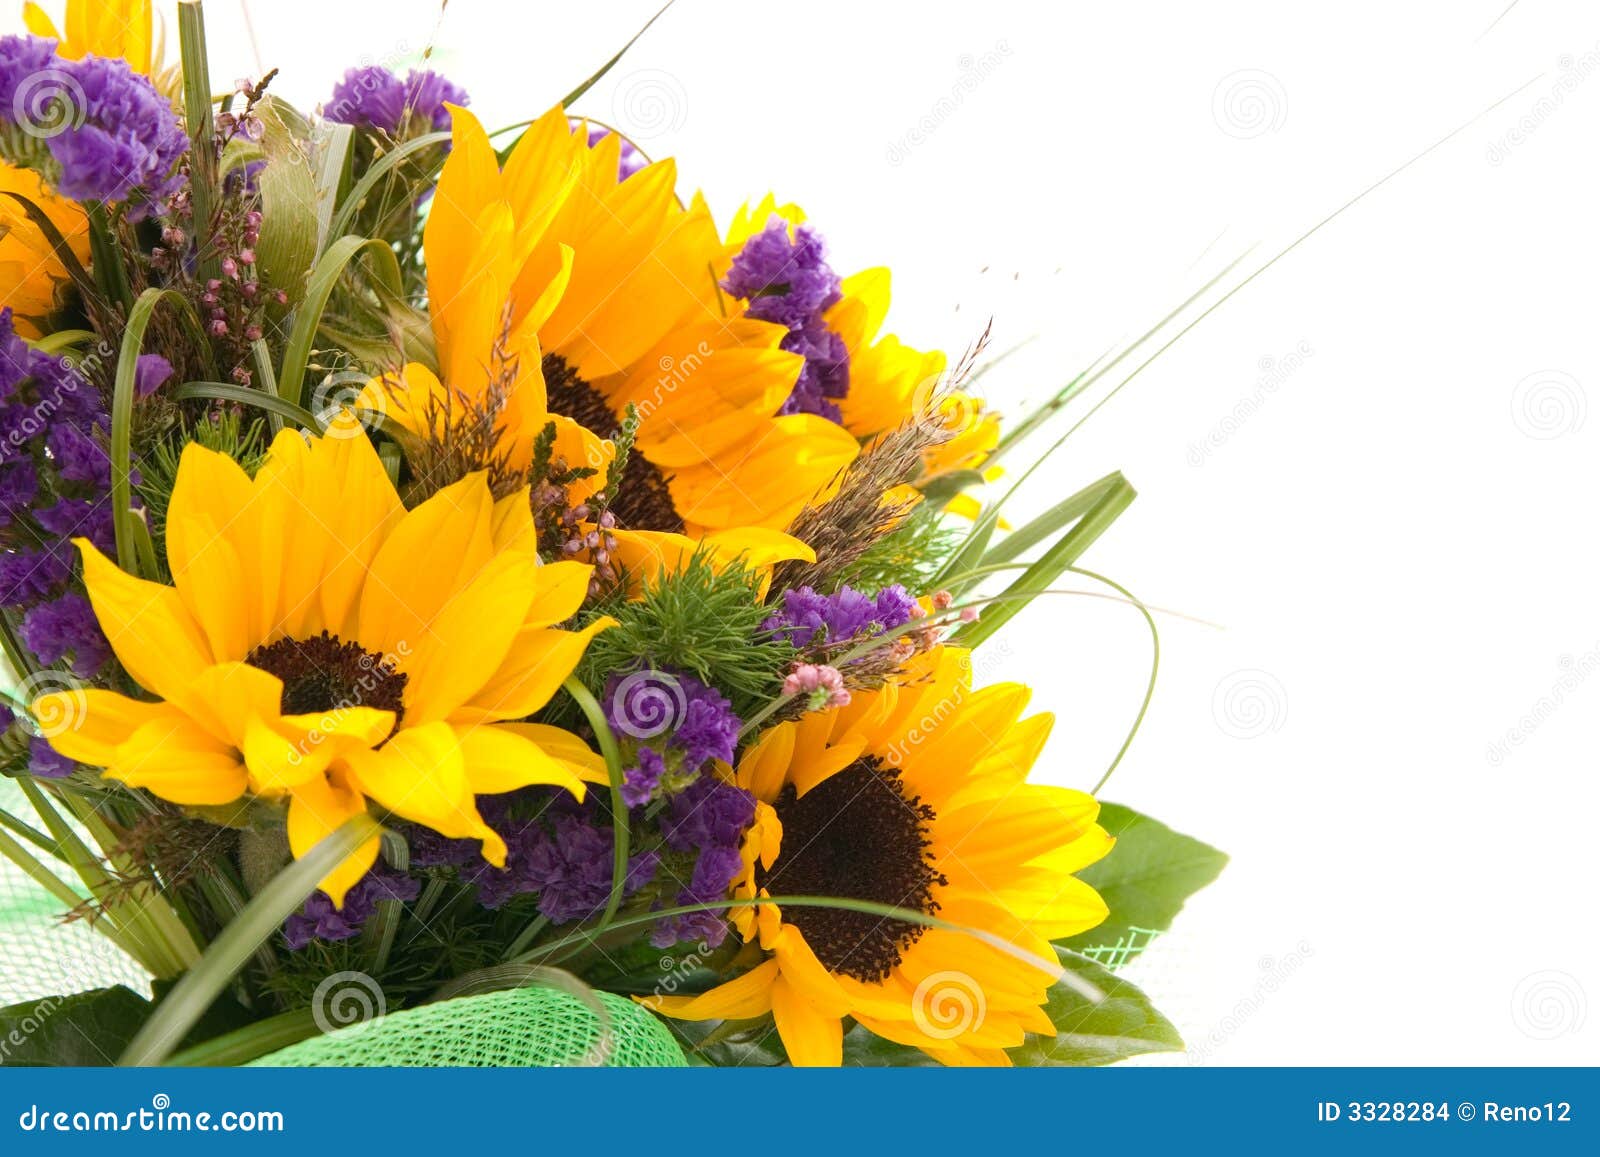 Bunch Of Flowers Stock Images - Image: 3328284